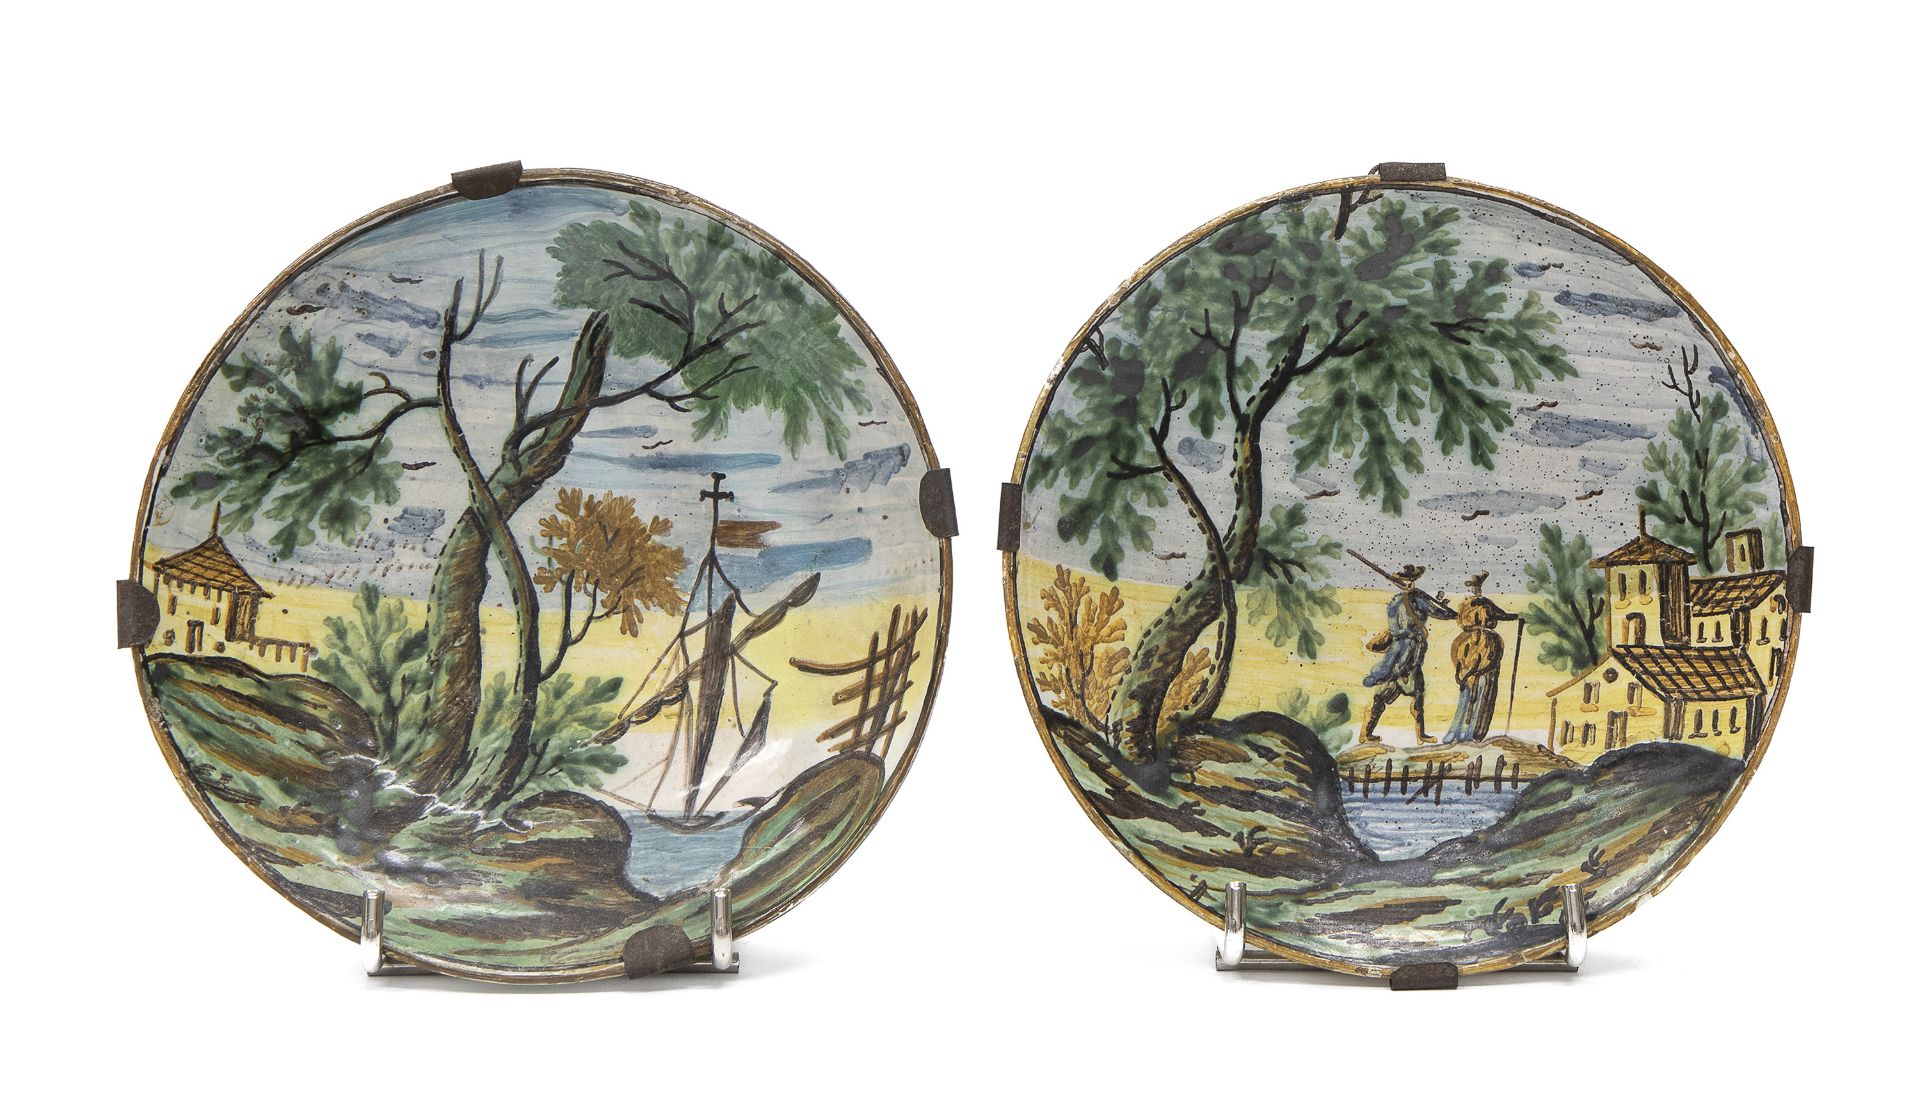 PAIR OF MAIOLICA SAUCERS ROMAN CASTLES OF THE GRUE EARLY 18TH CENTURY